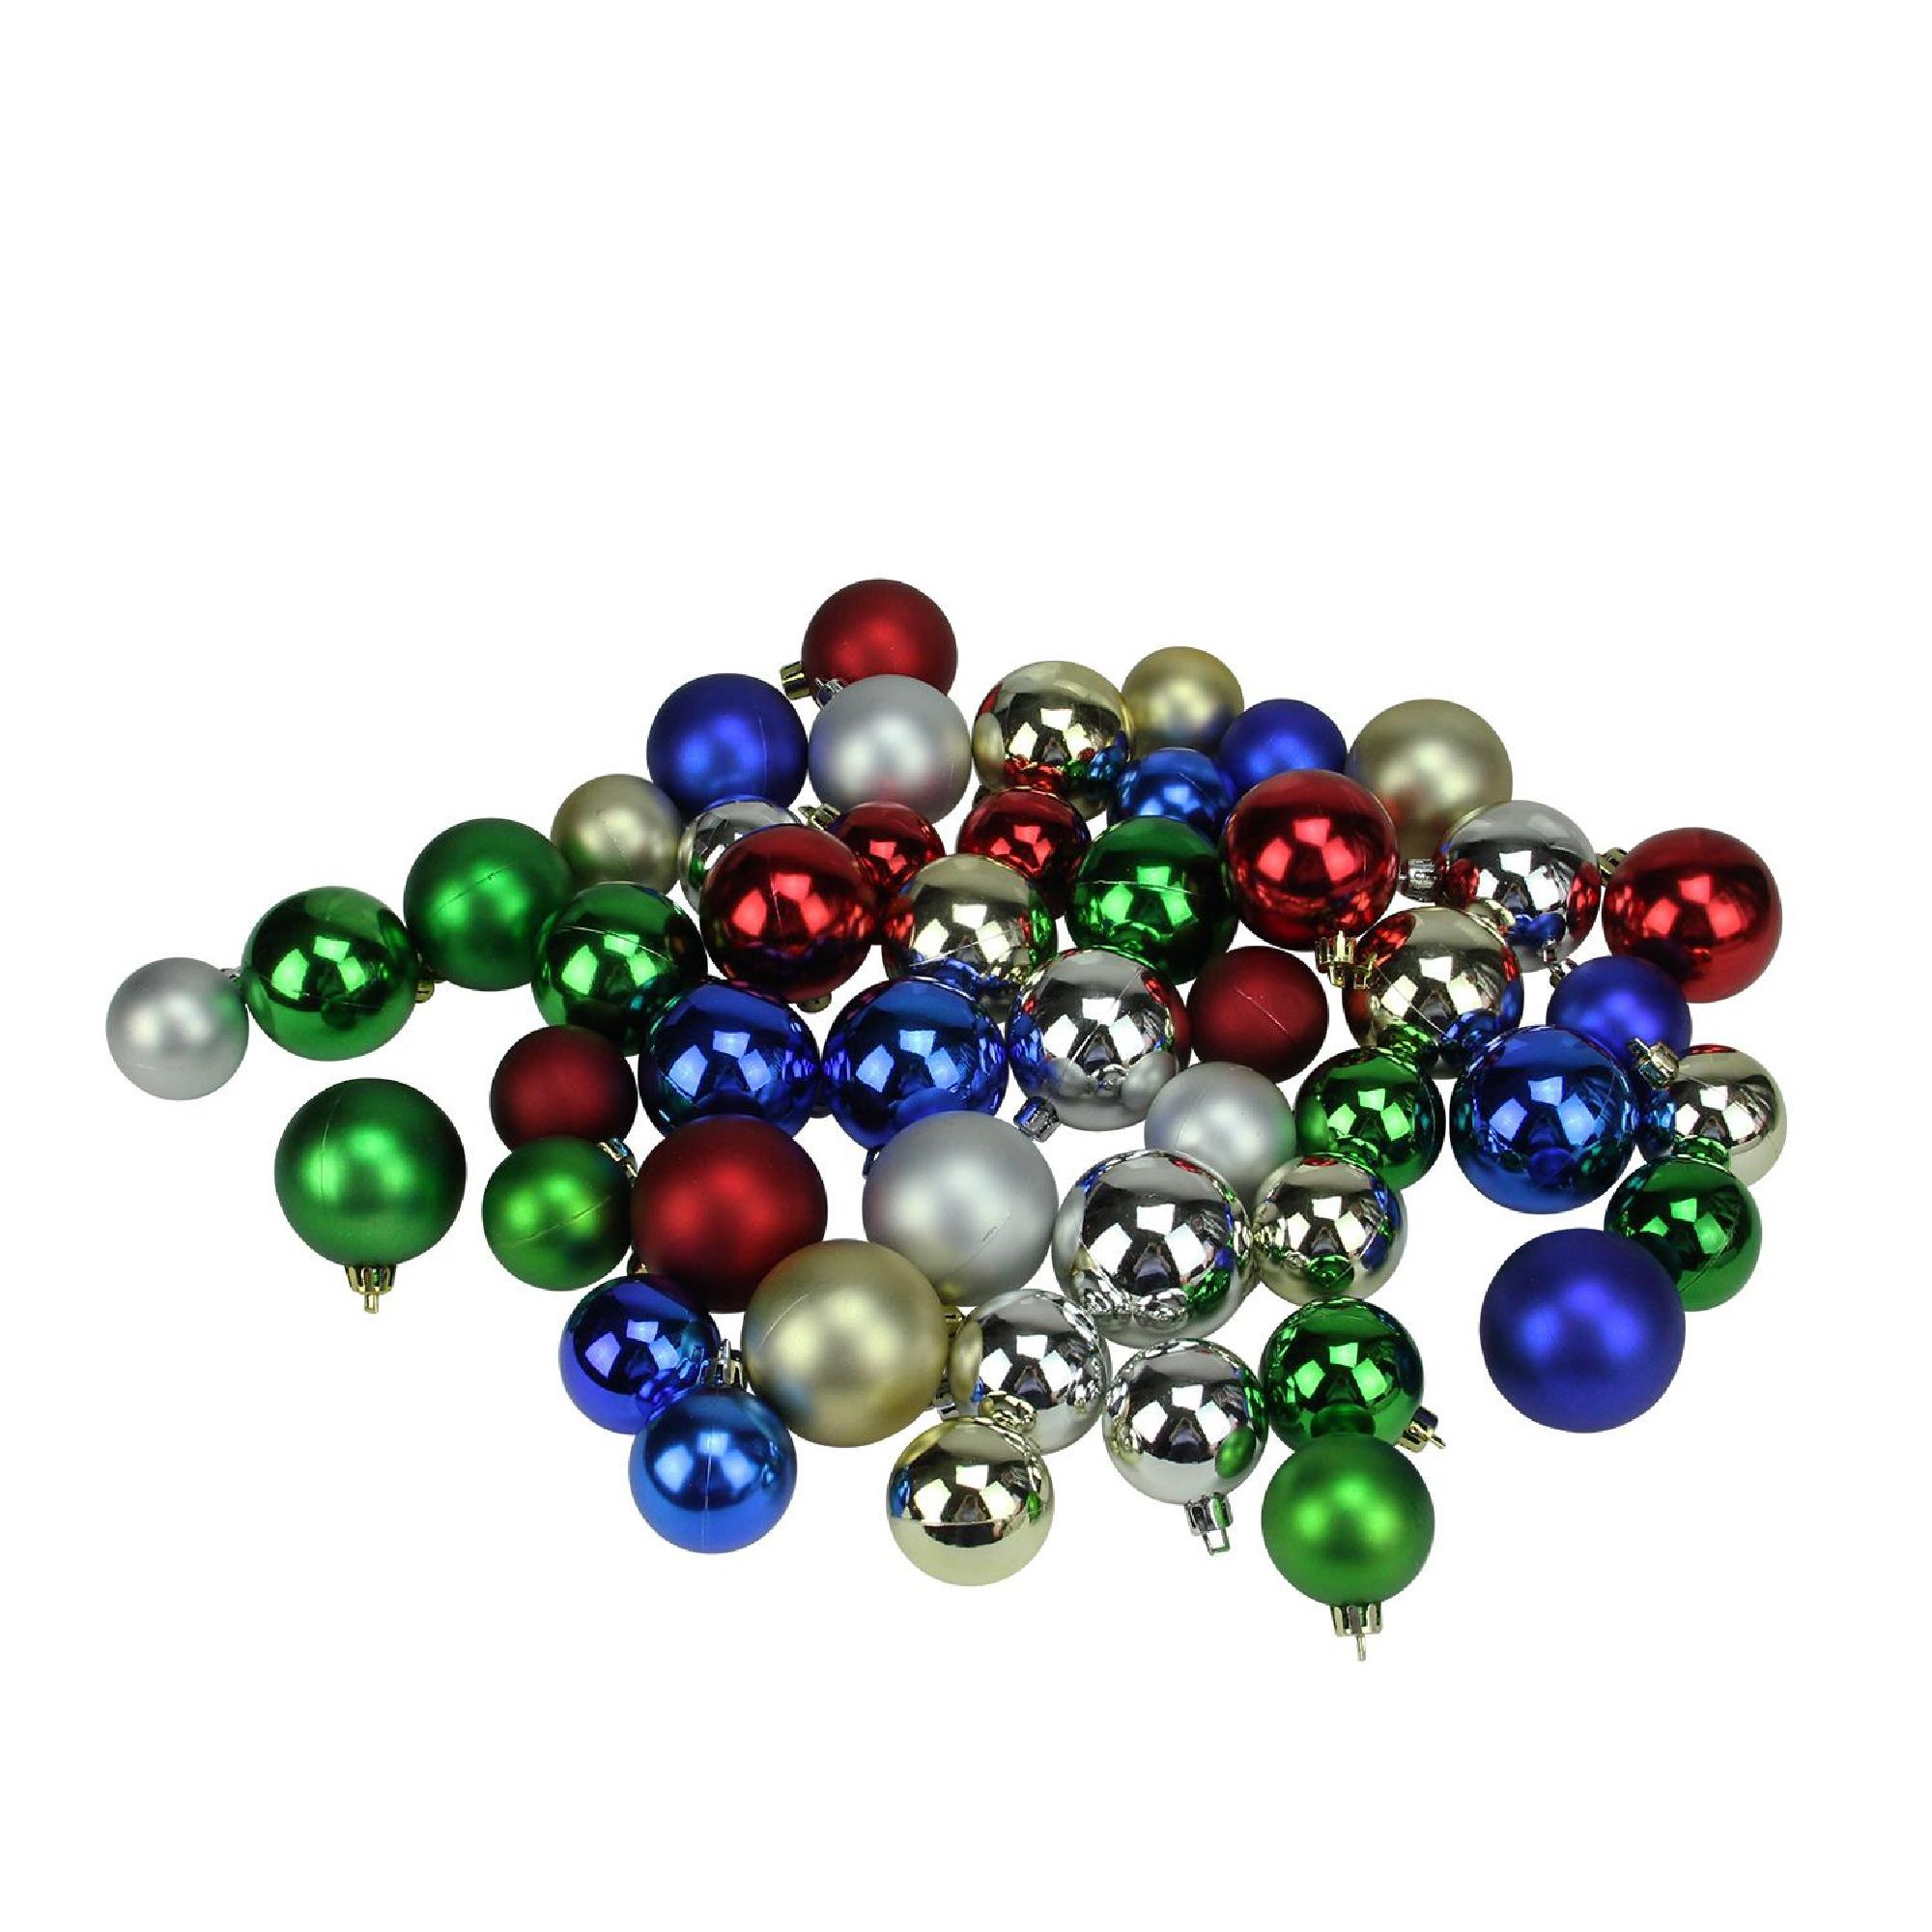 Northlight Shatterproof 2-Finish 2&quot; Christmas Ball Ornaments, 50 ct. - Multi-Color